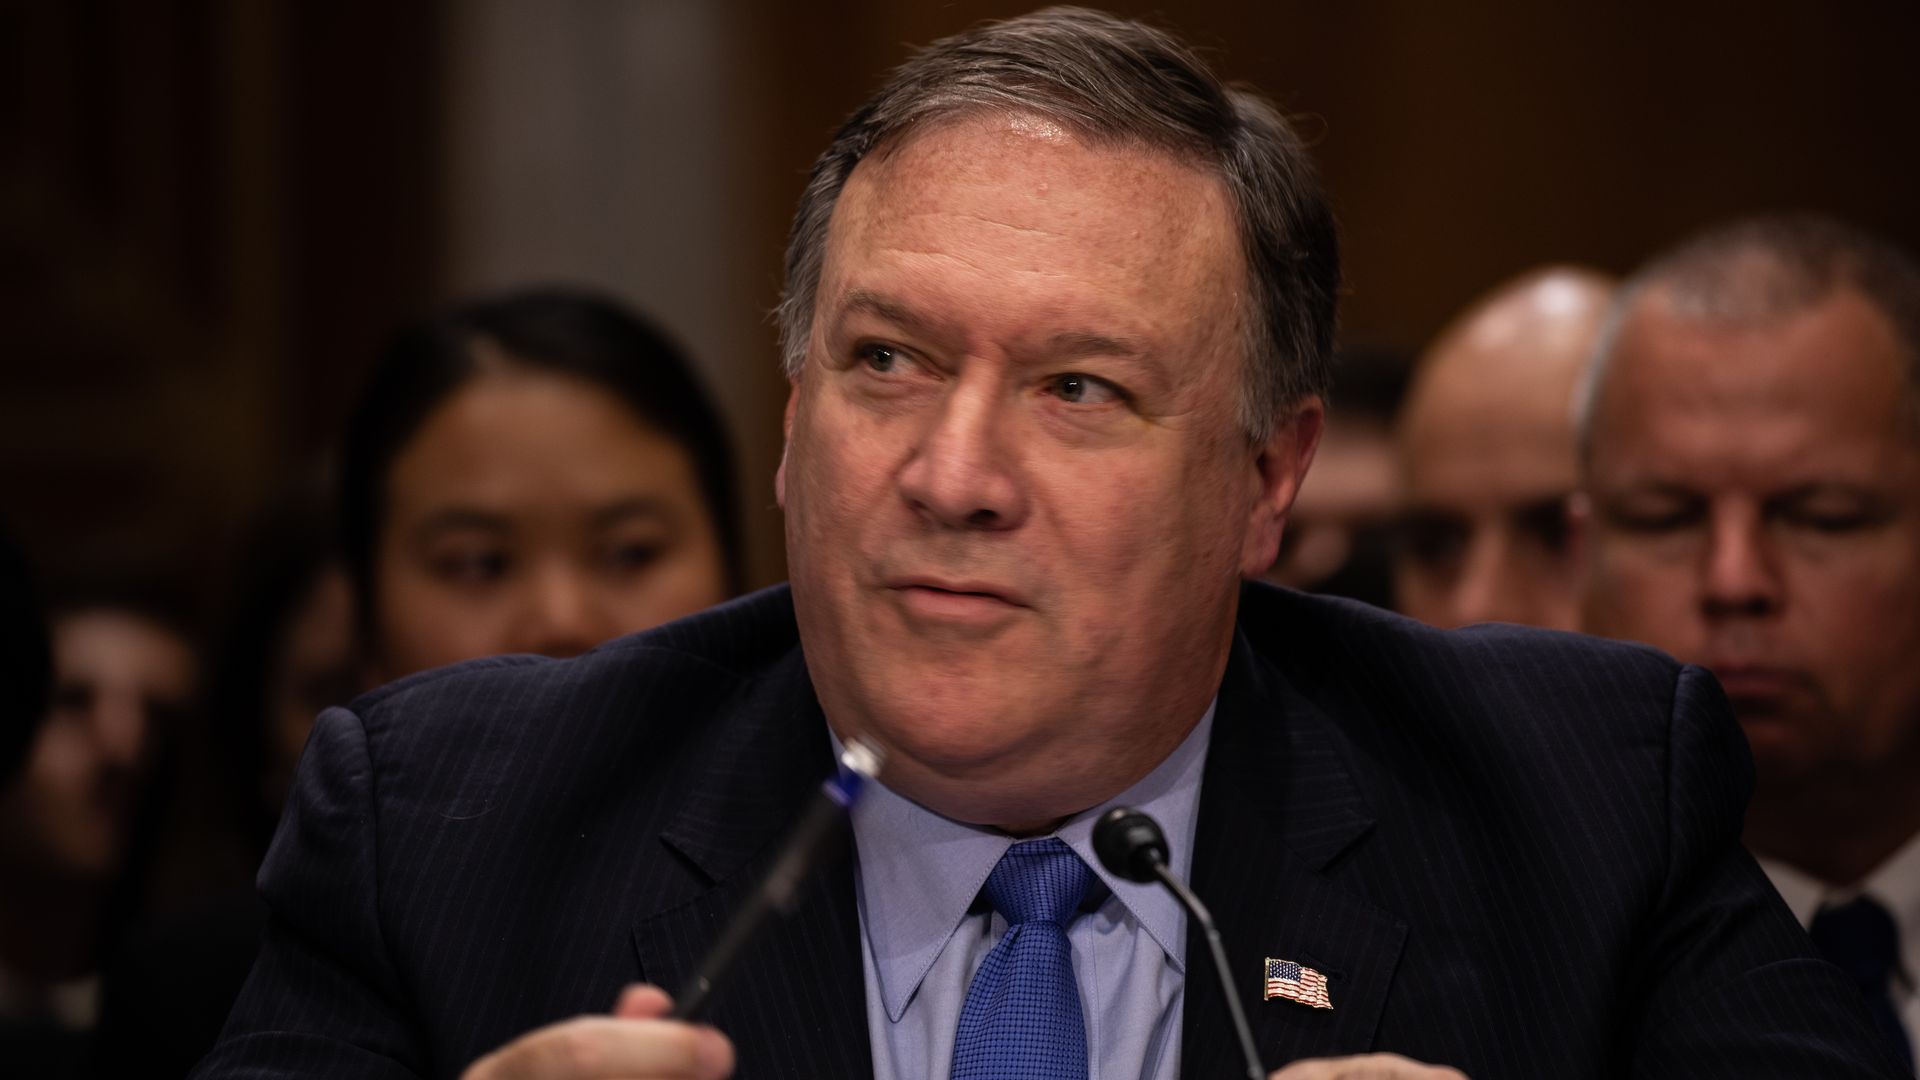 Mike Pompeo seated during his Senate testimony